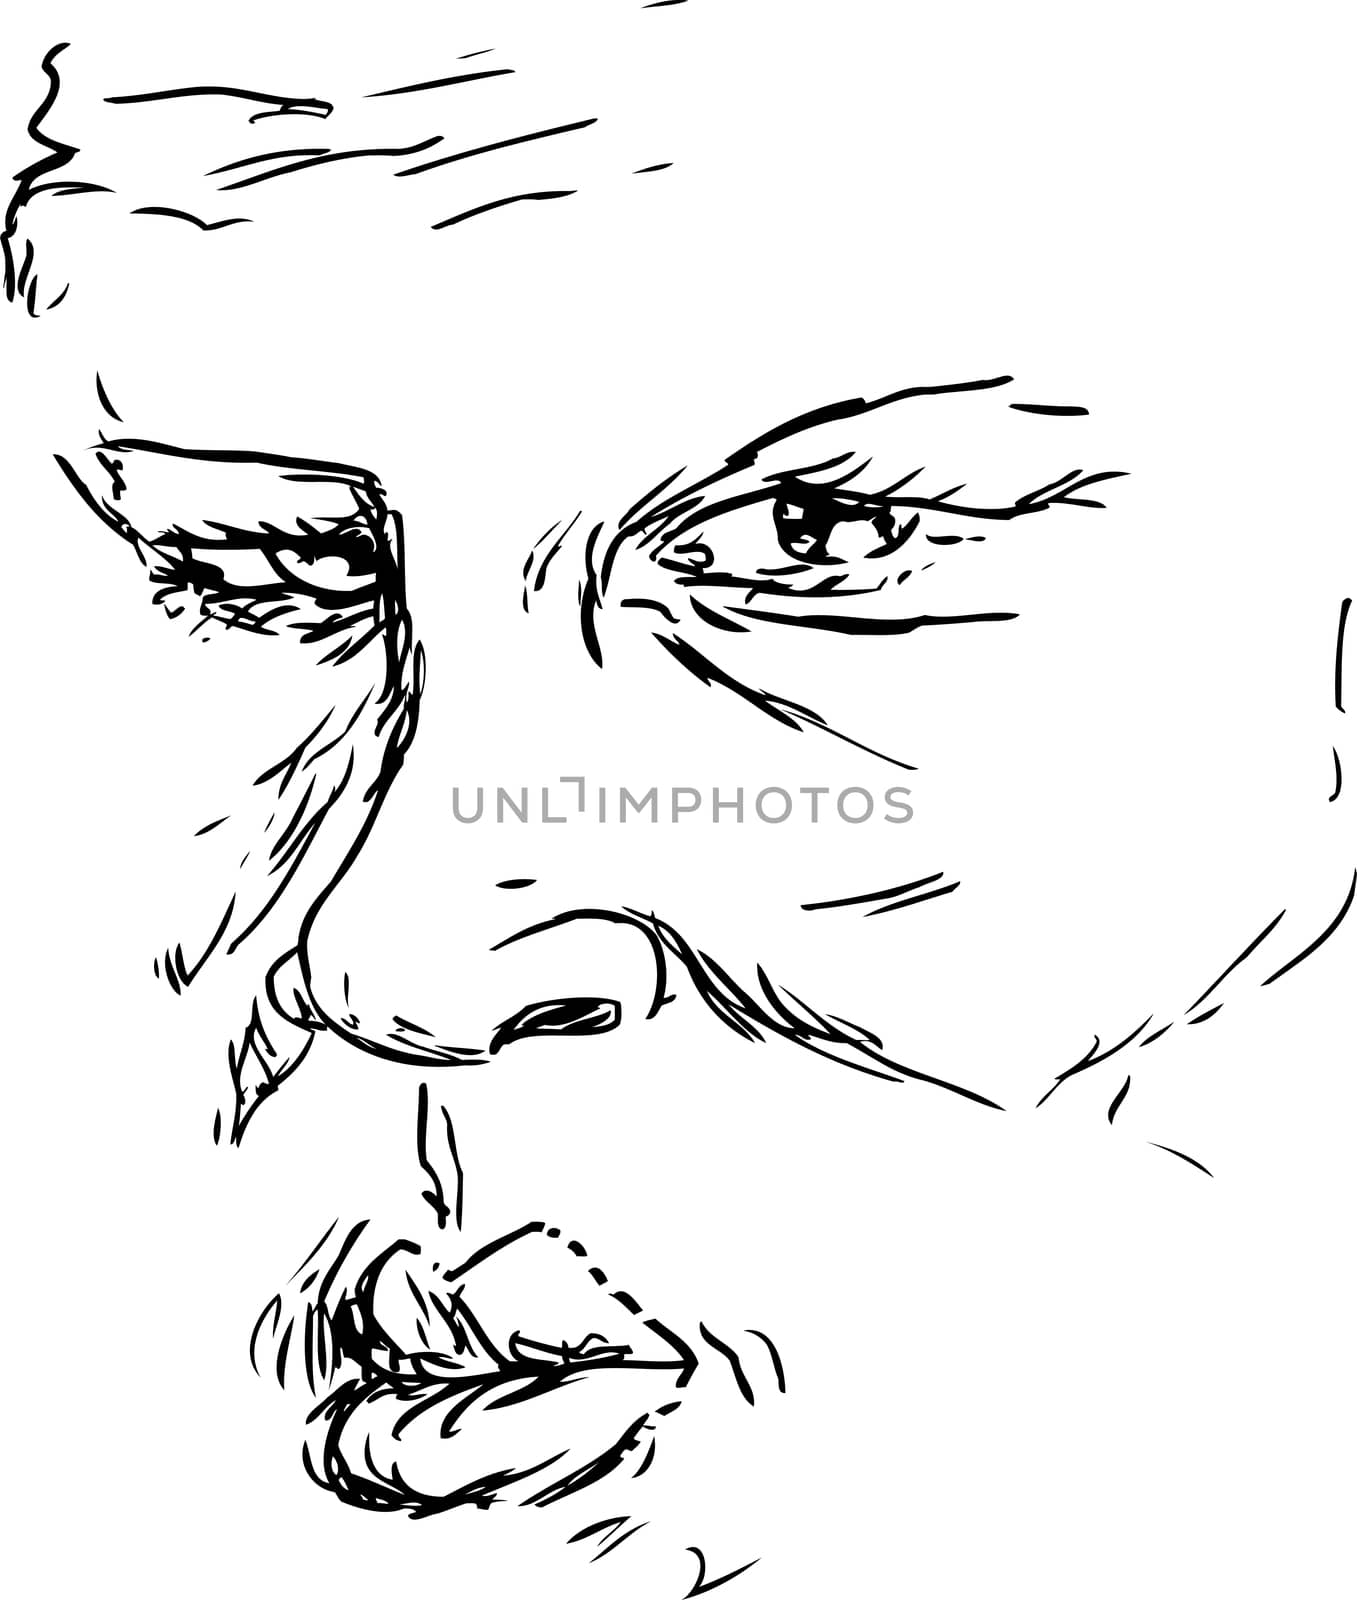 OUtlined drawing of older serious Black man face